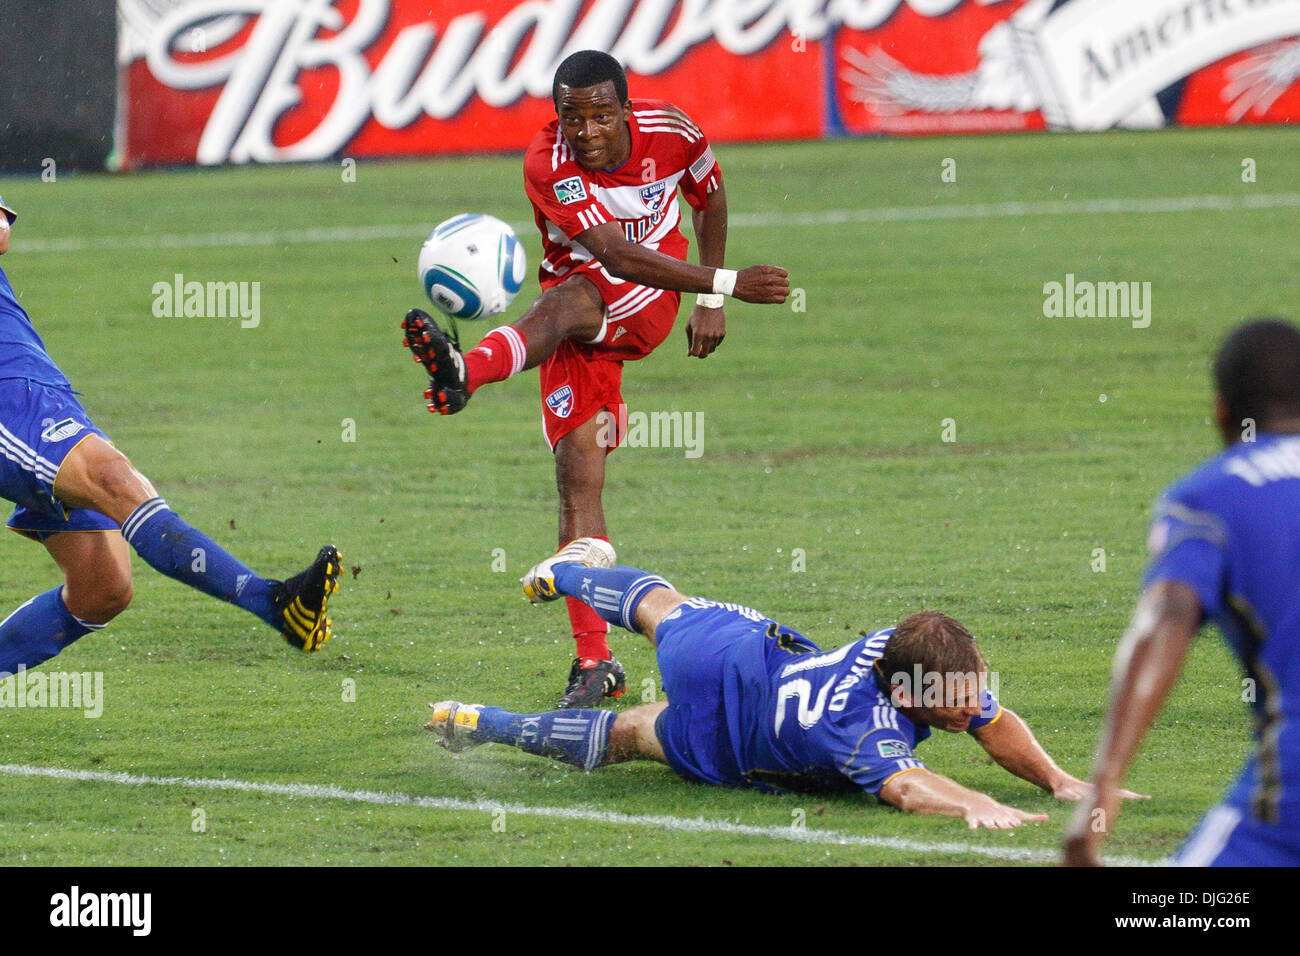 July 03, 2010 - Frisco, Texas, USA - 03 July 2010:  FC Dallas midfielder Marvin Chavez (#18) takes a shot on goal against the KC Wizards.  FC Dallas won the match 1-0 at Pizza Hut Park in Frisco, Texas.  Credit: Andrew Dieb / Southcreek Global (Credit Image: © Andrew Dieb/Southcreek Global/ZUMApress.com) Stock Photo